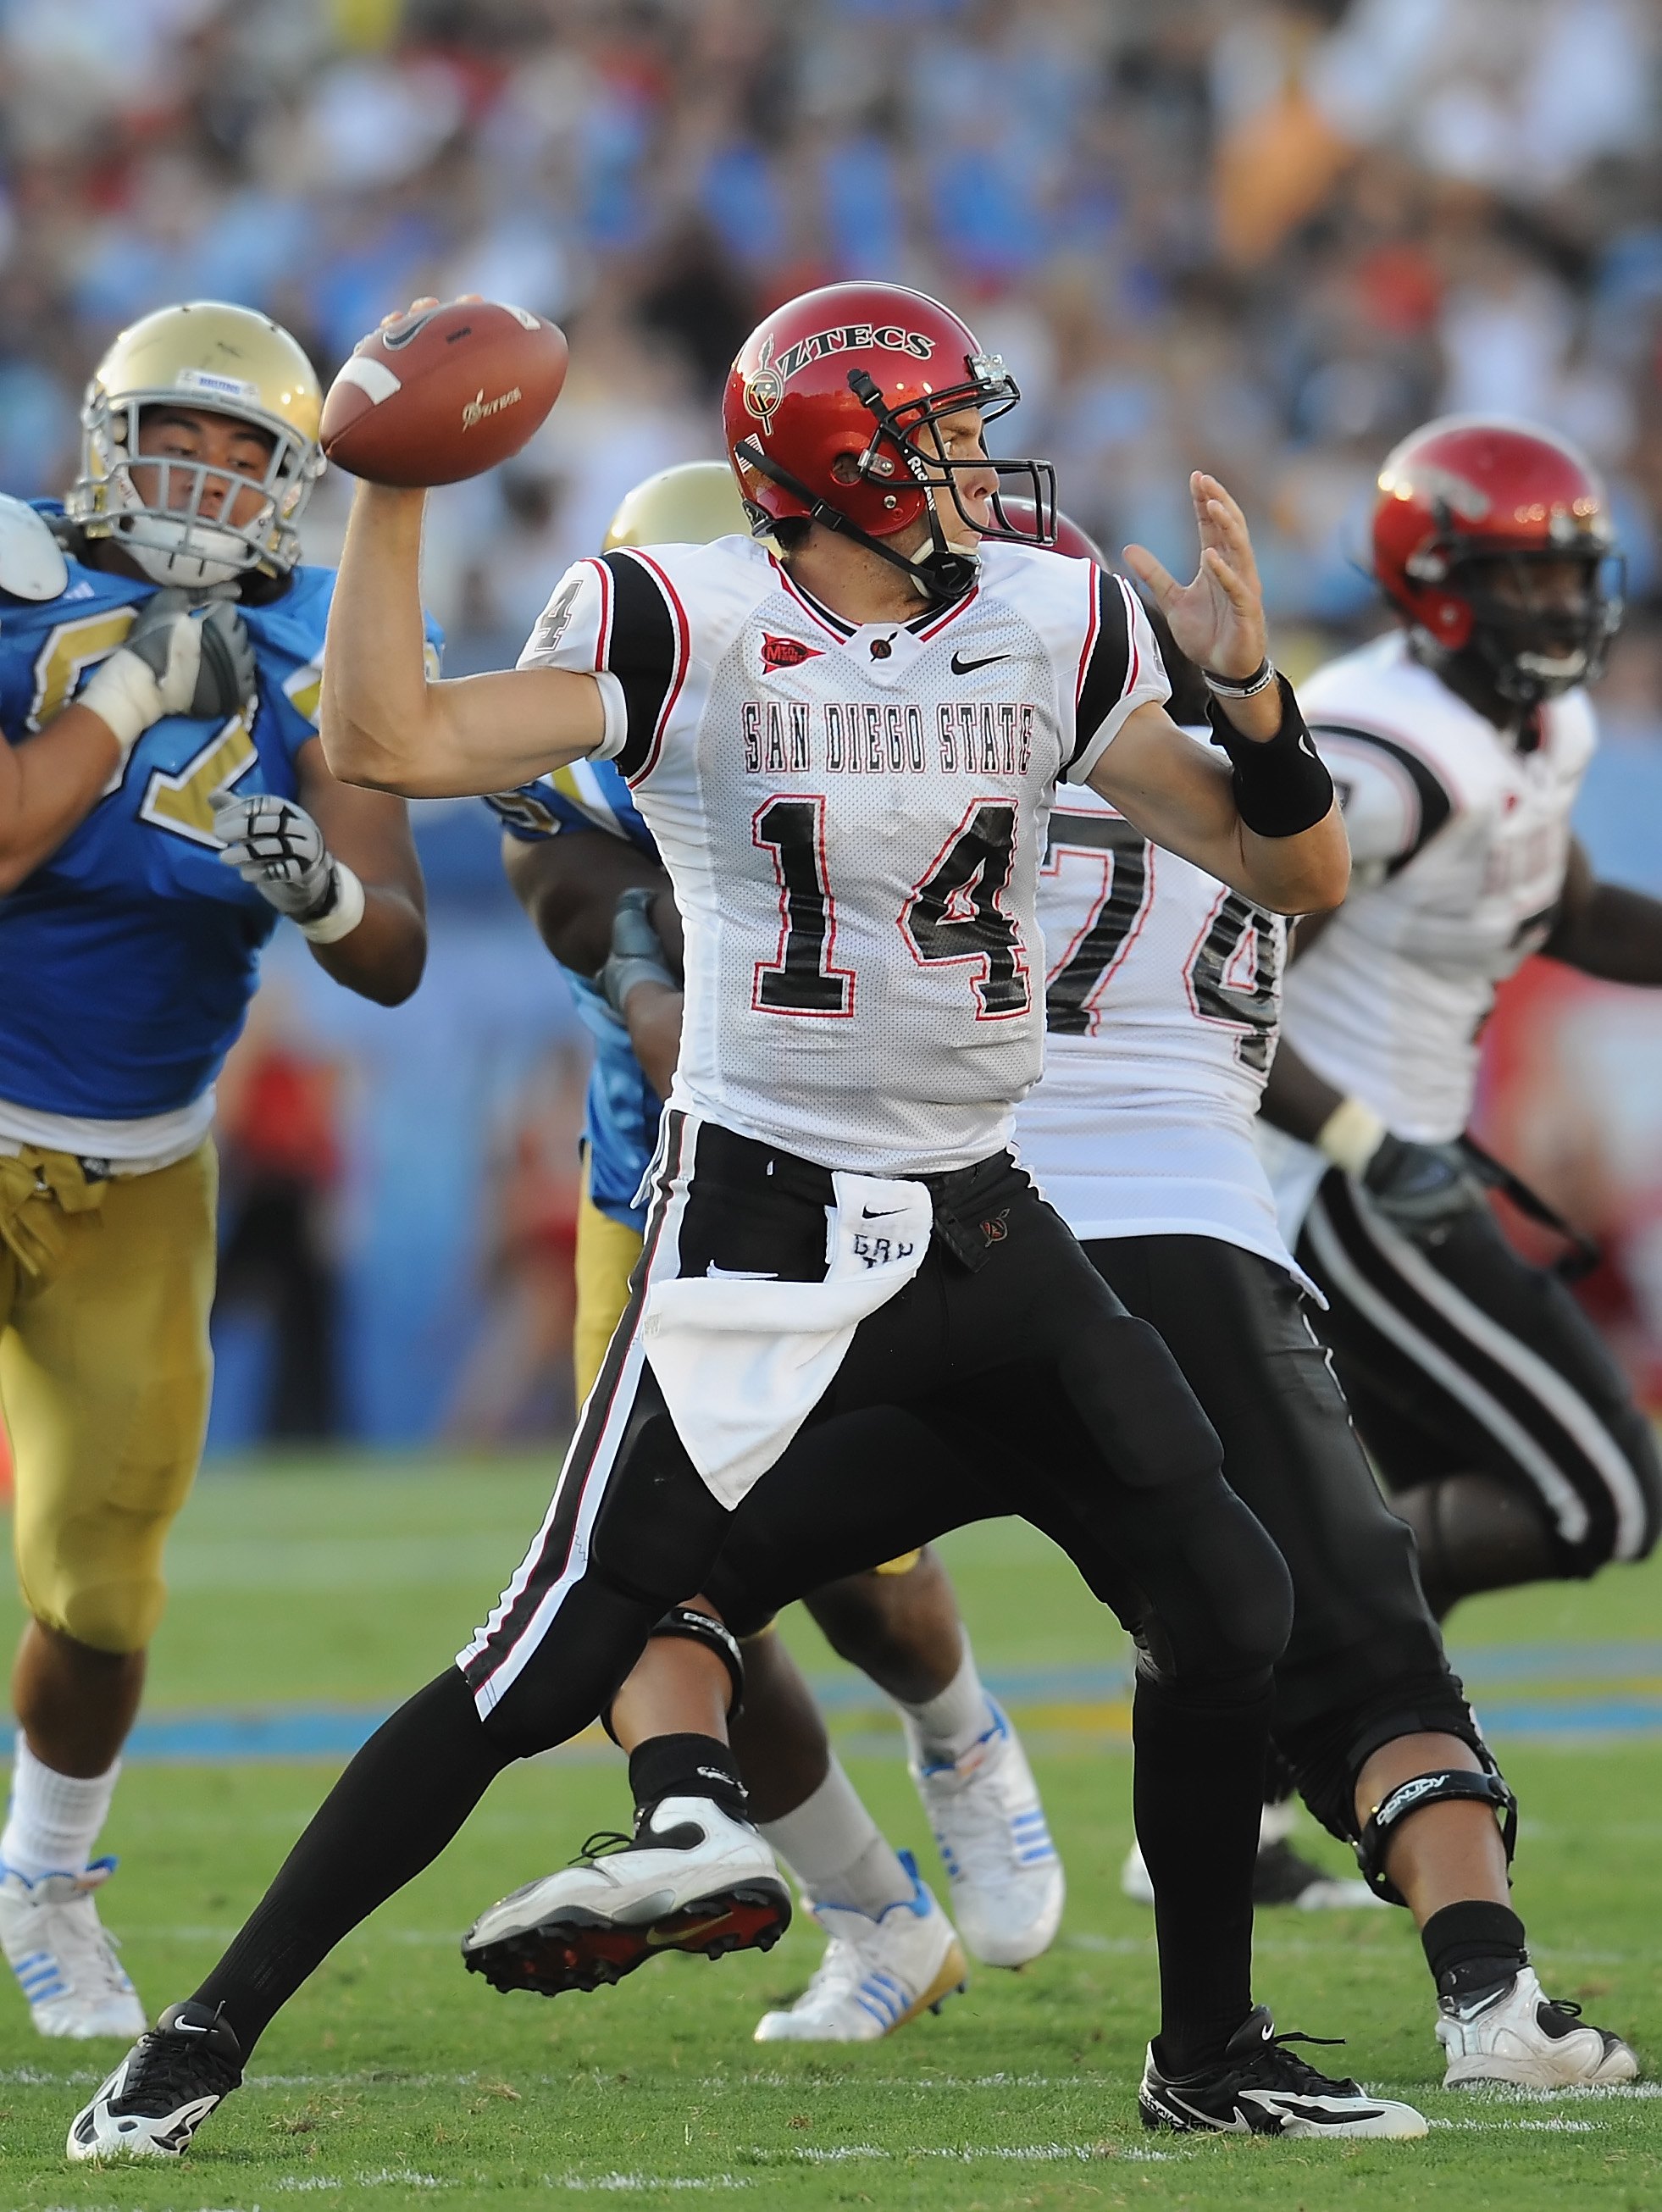 PASADENA, CA - SEPTEMBER 05:   Ryan Lindley #14 of the San Diego State Aztecs looks to pass the ball during the game against the UCLA Bruins at The Rose Bowl on September 5, 2009 in Pasadena, California.  (Photo by Lisa Blumenfeld/Getty Images)